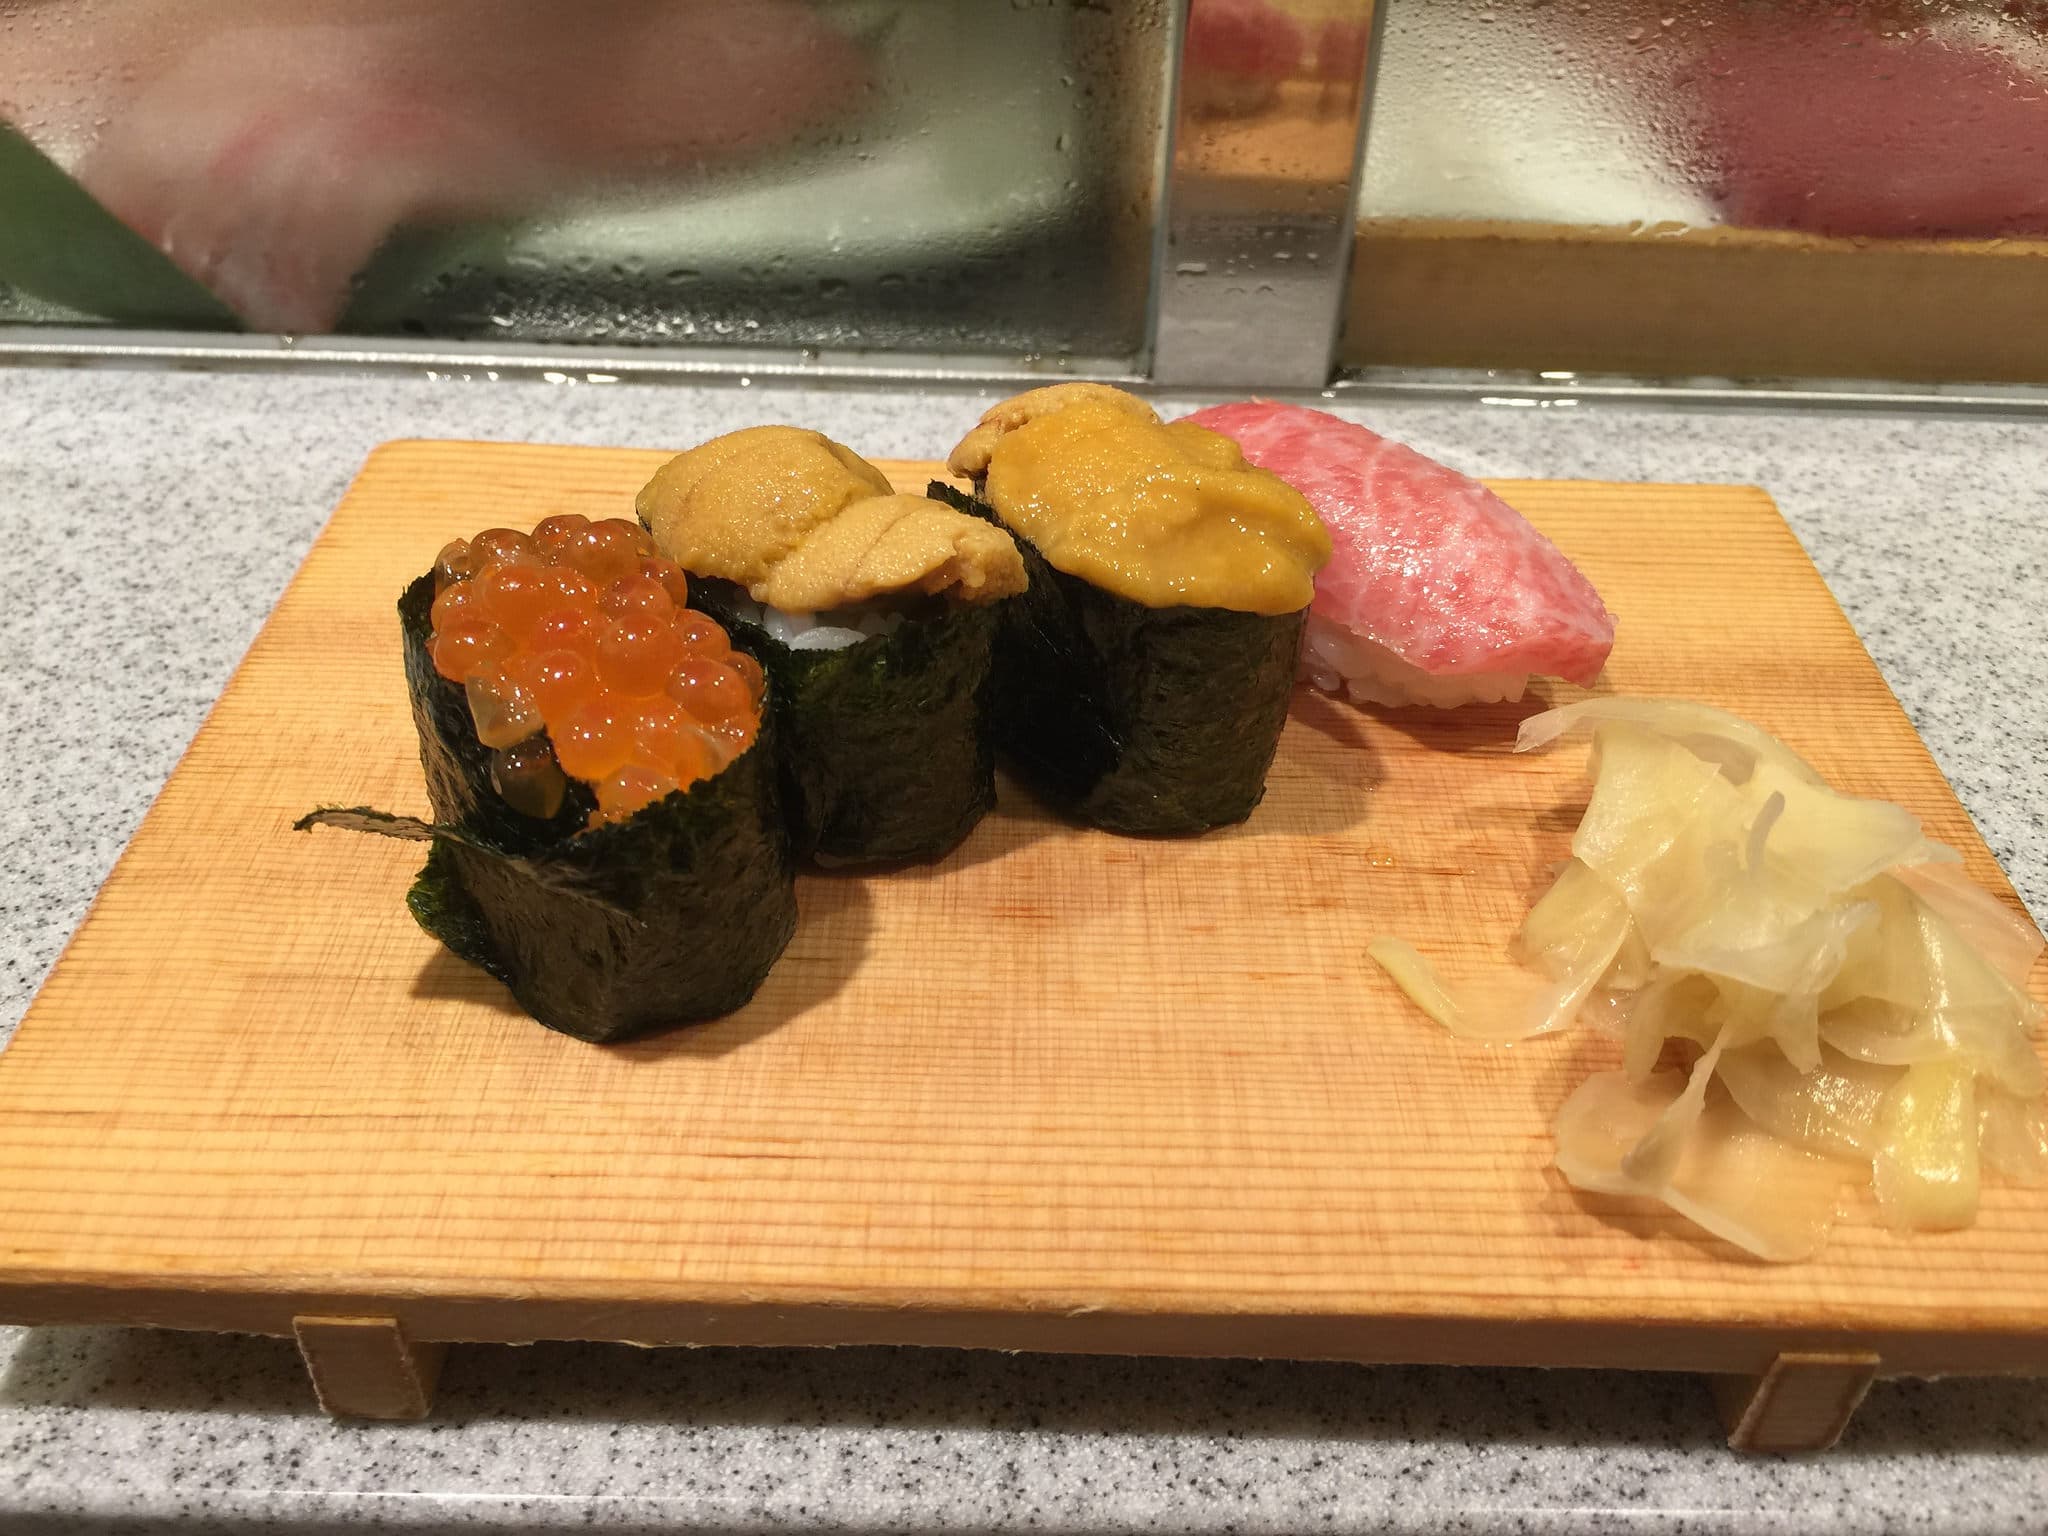 https://foodicles.com/wp-content/uploads/2019/02/Standing-Sushi-Tokyo-Station-5.jpg